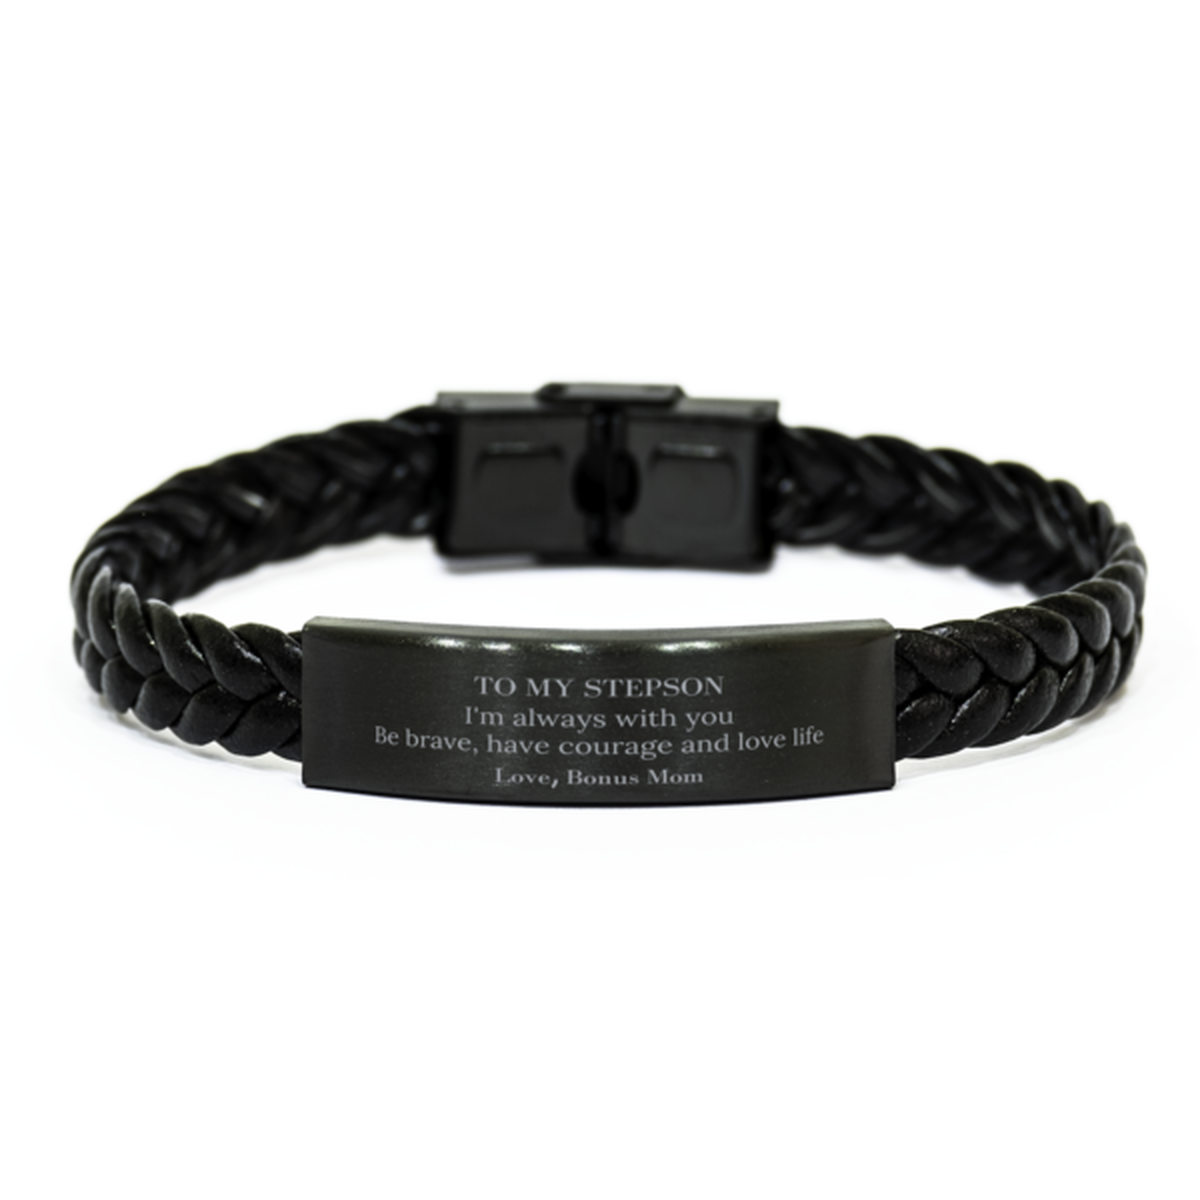 To My Stepson Gifts from Bonus Mom, Unique Braided Leather Bracelet Inspirational Christmas Birthday Graduation Gifts for Stepson I'm always with you. Be brave, have courage and love life. Love, Bonus Mom